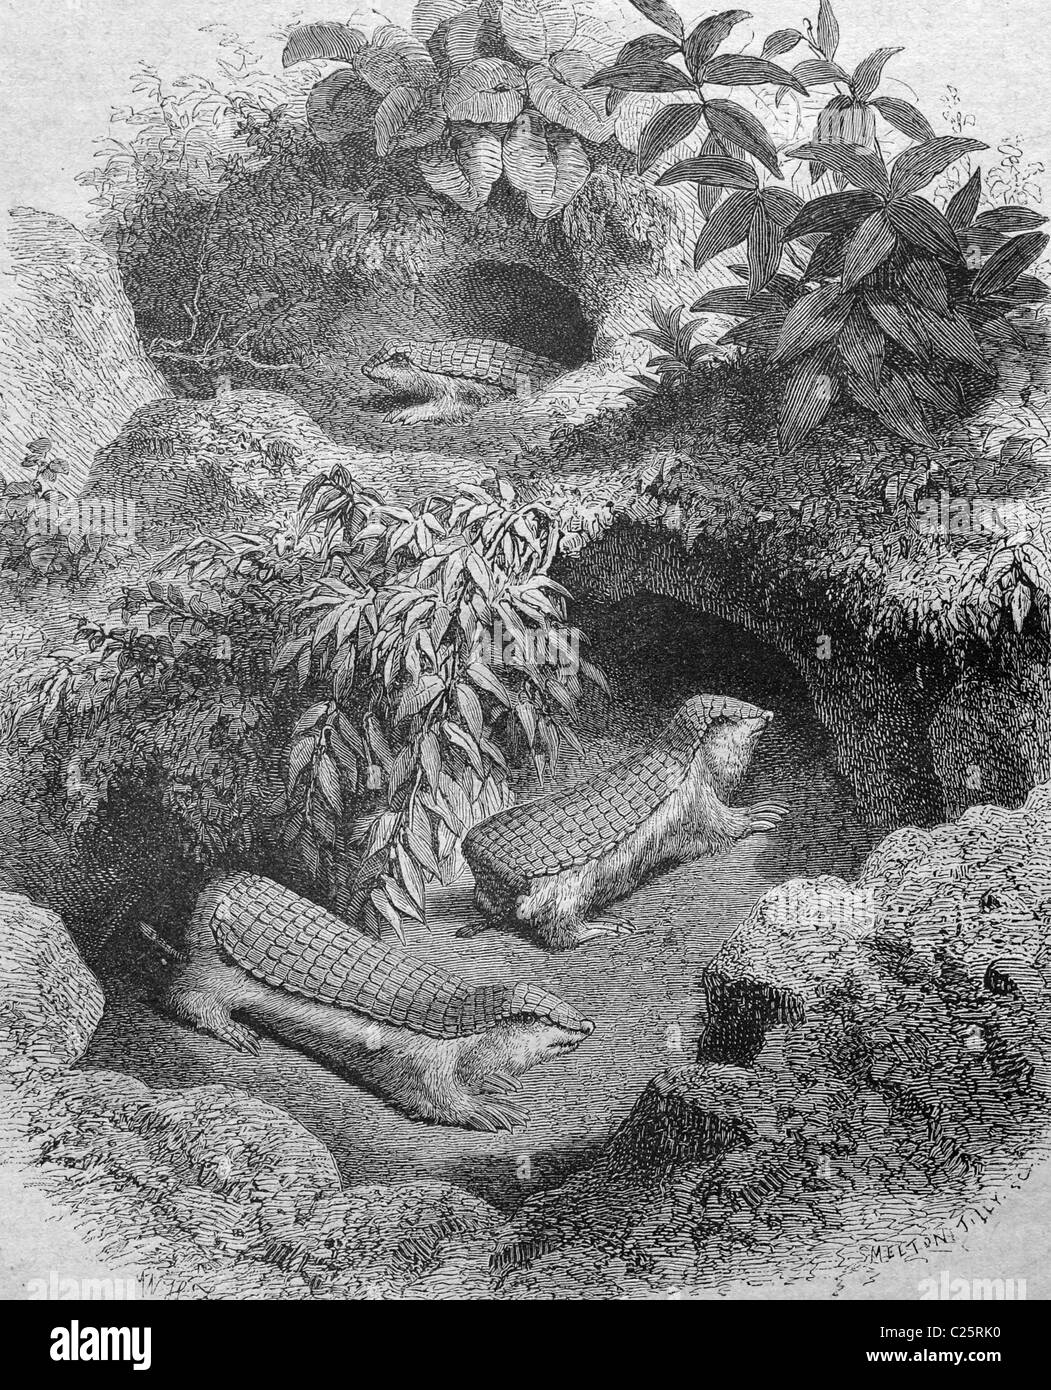 Pink Fairy Armadillo or Pichiciego (Chlamyphorus), in front of their den, historical illustration, 1877 Stock Photo